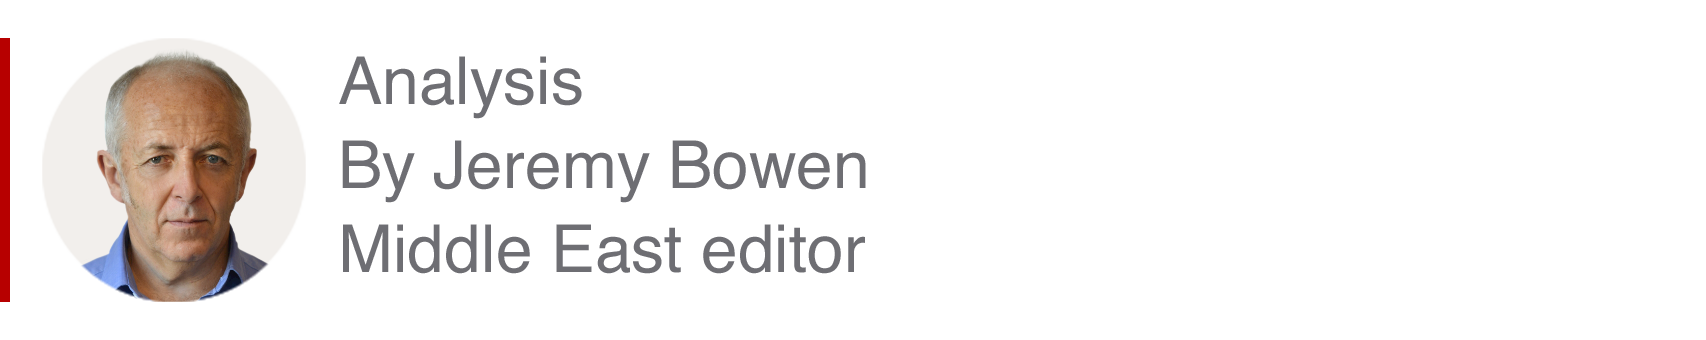 Analysis box by Jeremy Bowen, Middle East editor